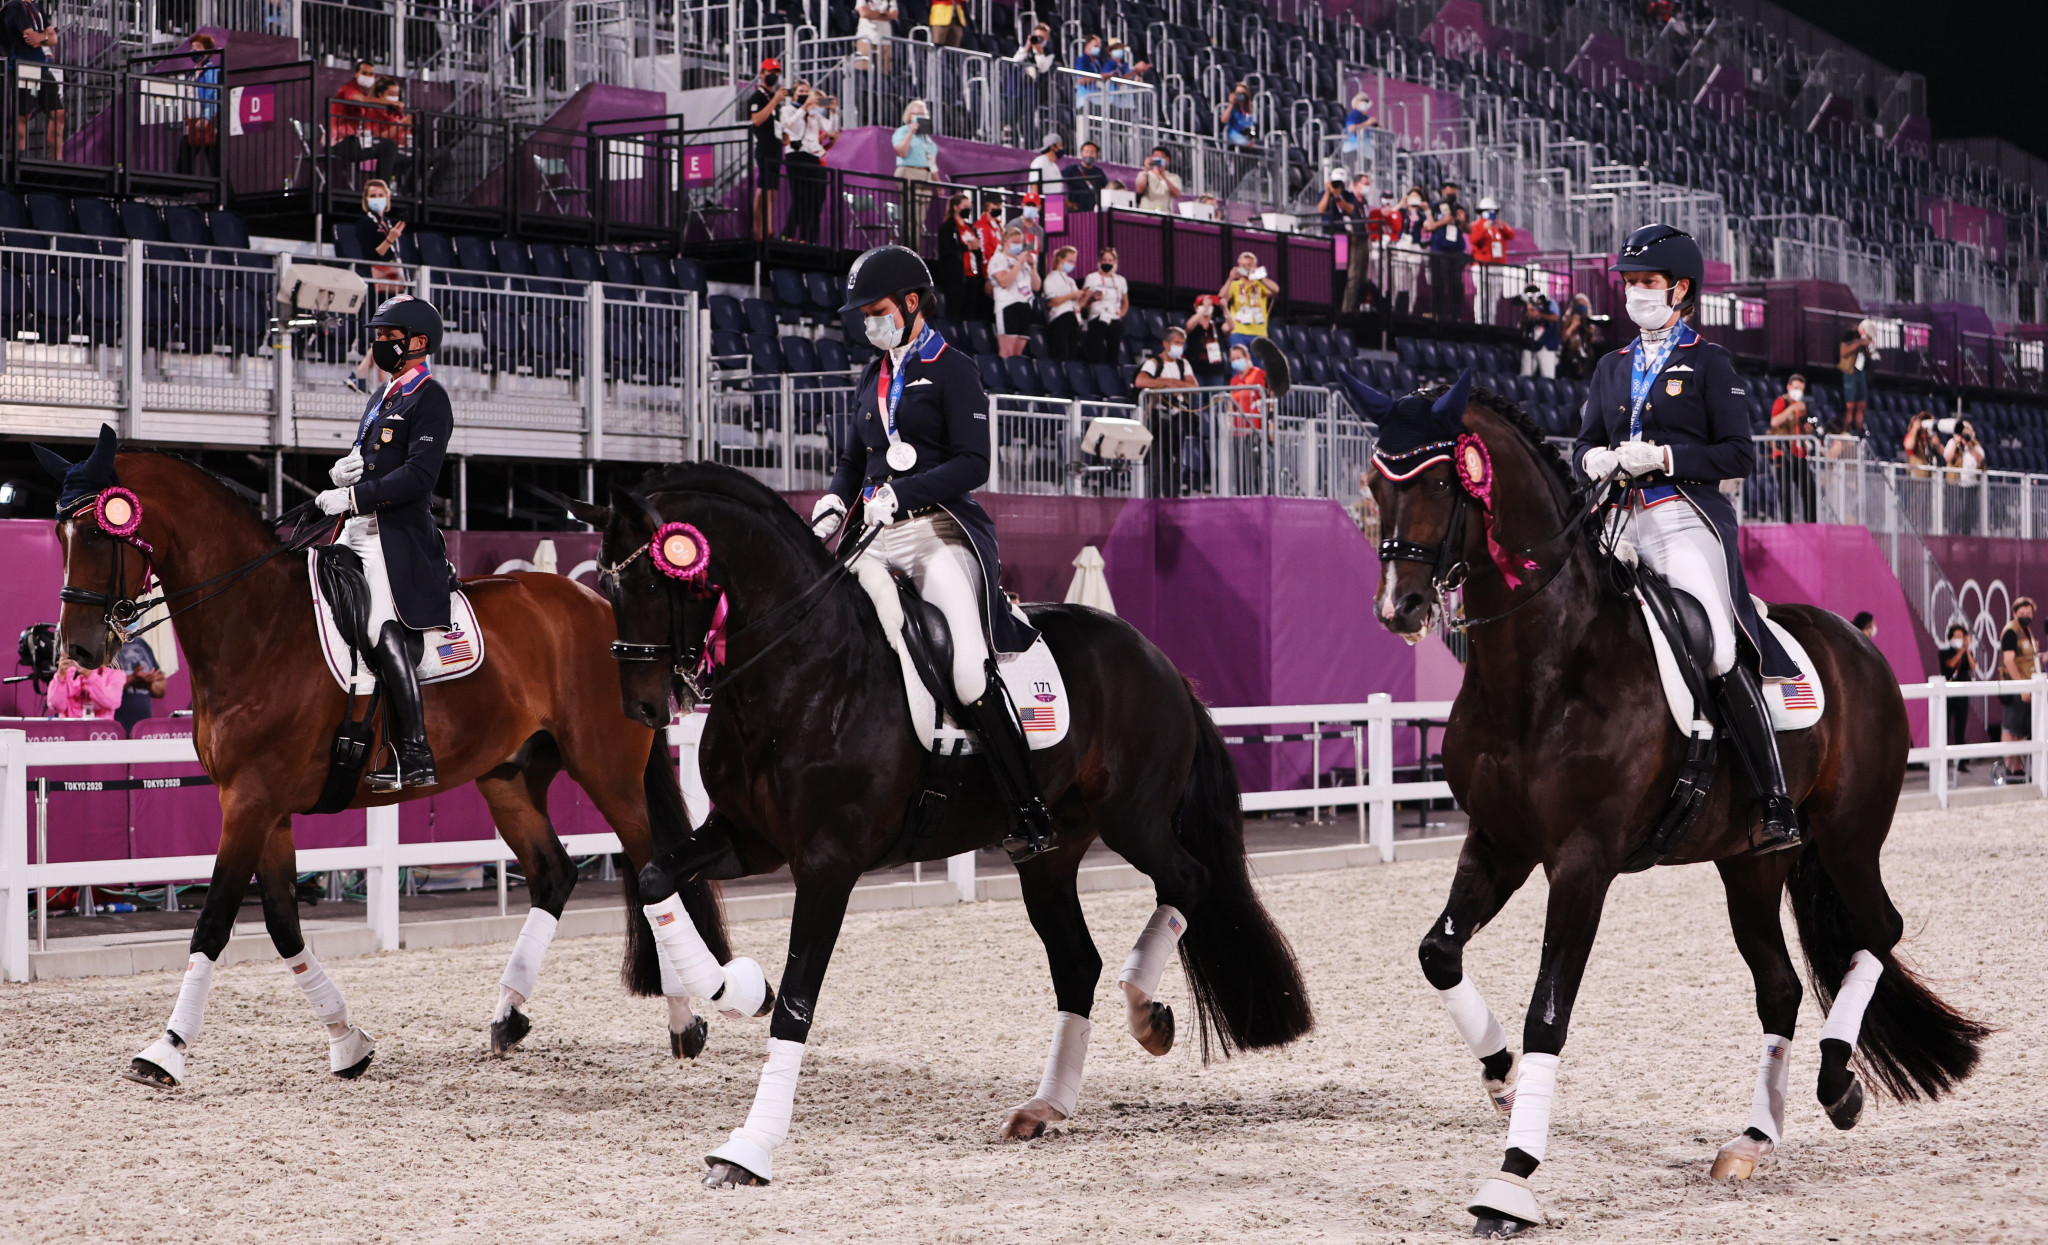 Debbie McDonald helped the United States team win dressage silver at Tokyo 2020 ©Getty Images